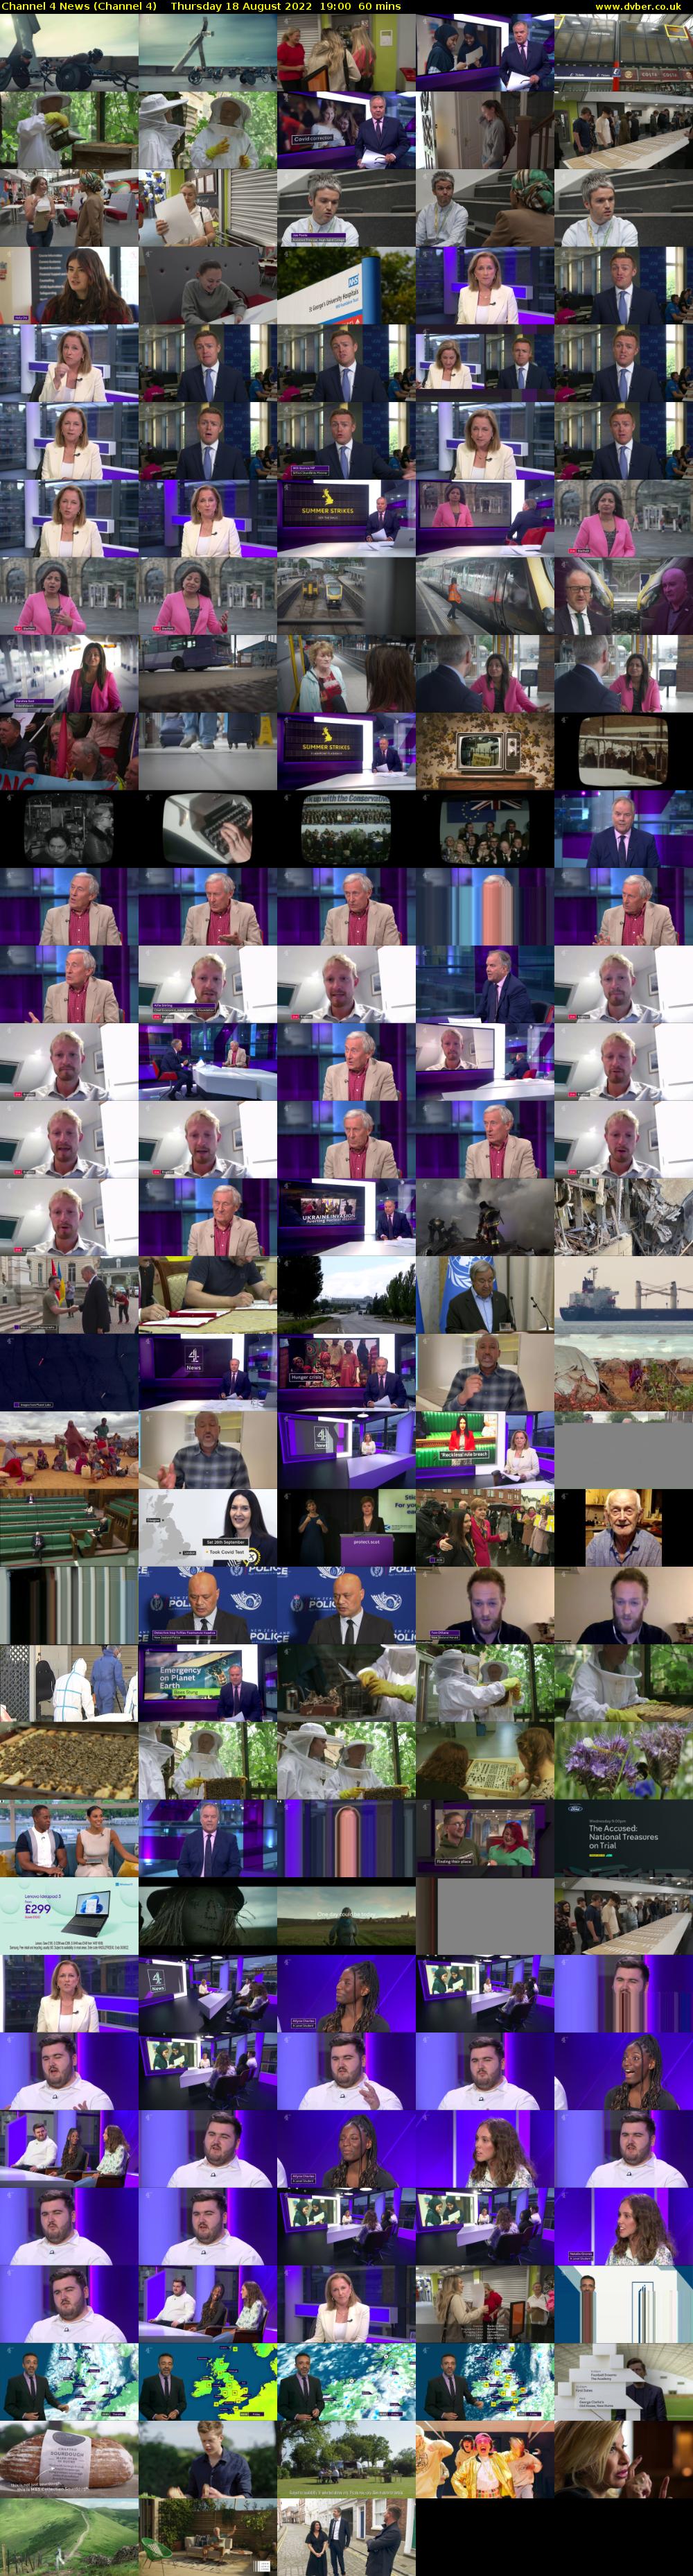 Channel 4 News (Channel 4) Thursday 18 August 2022 19:00 - 20:00